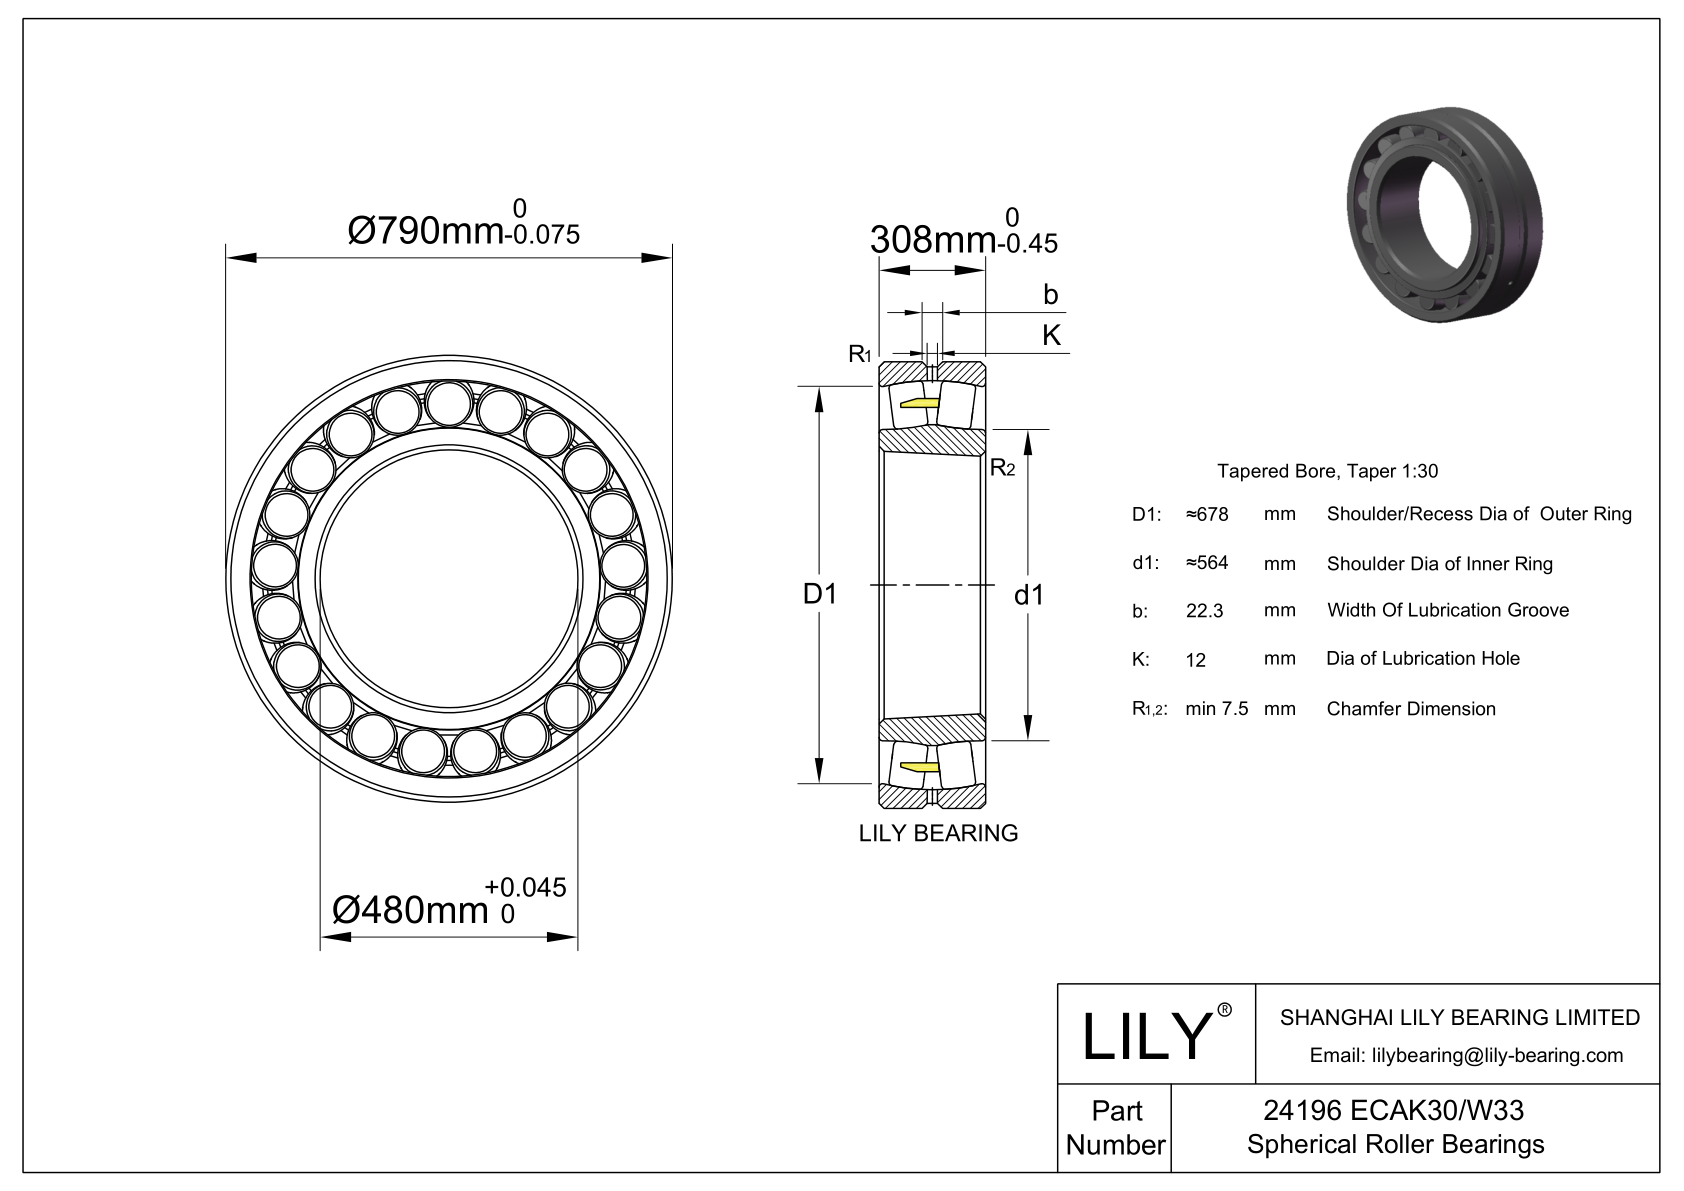 24196 ECAK30/W33 Double Row Spherical Roller Bearing cad drawing